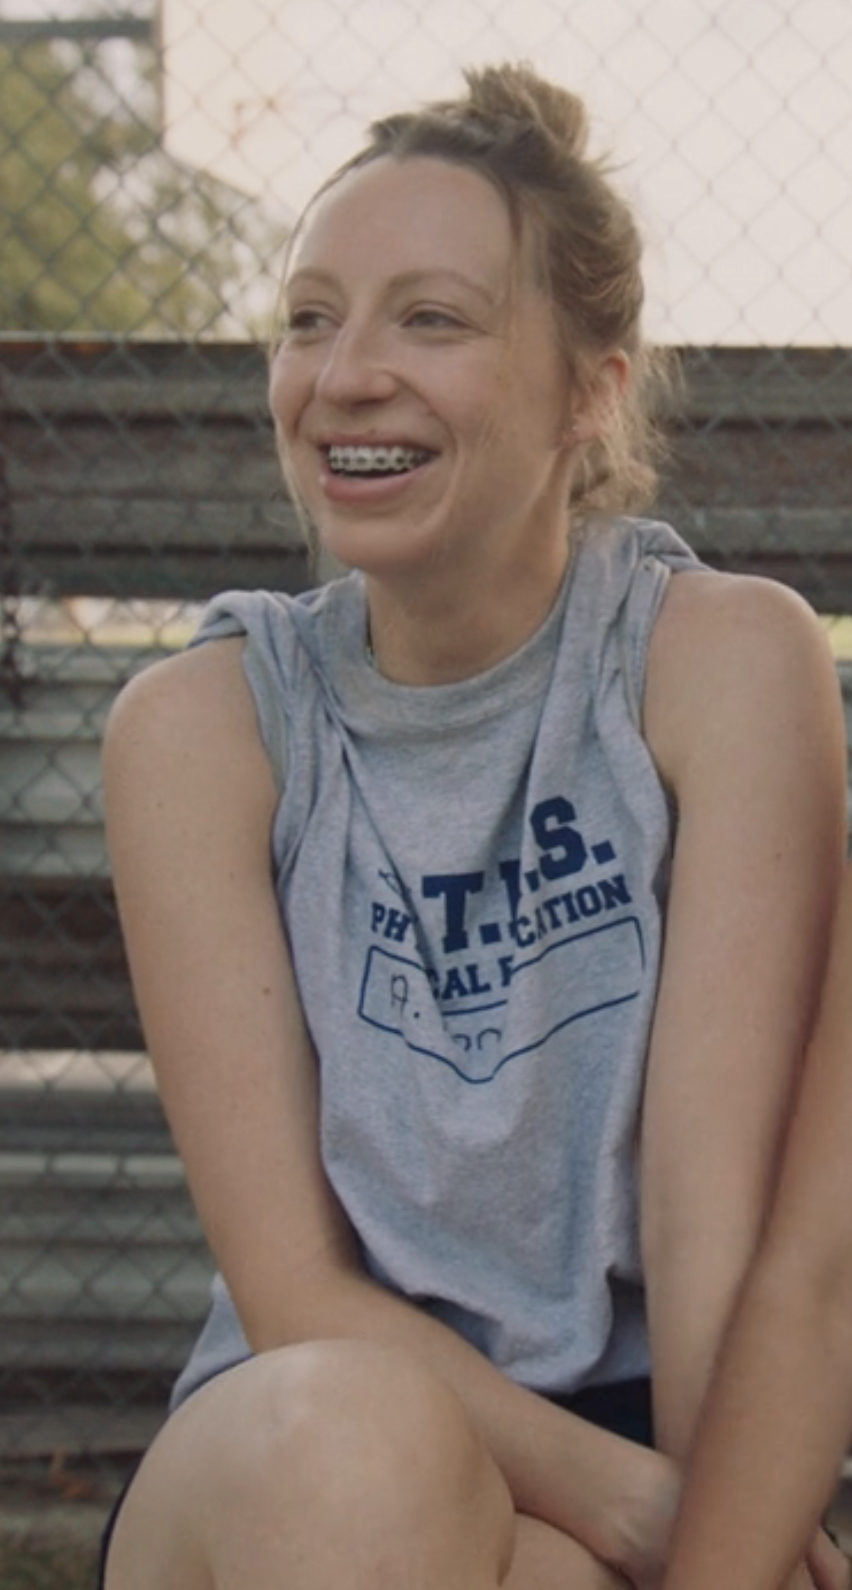 Anna in athletic wear with braces and messy bun